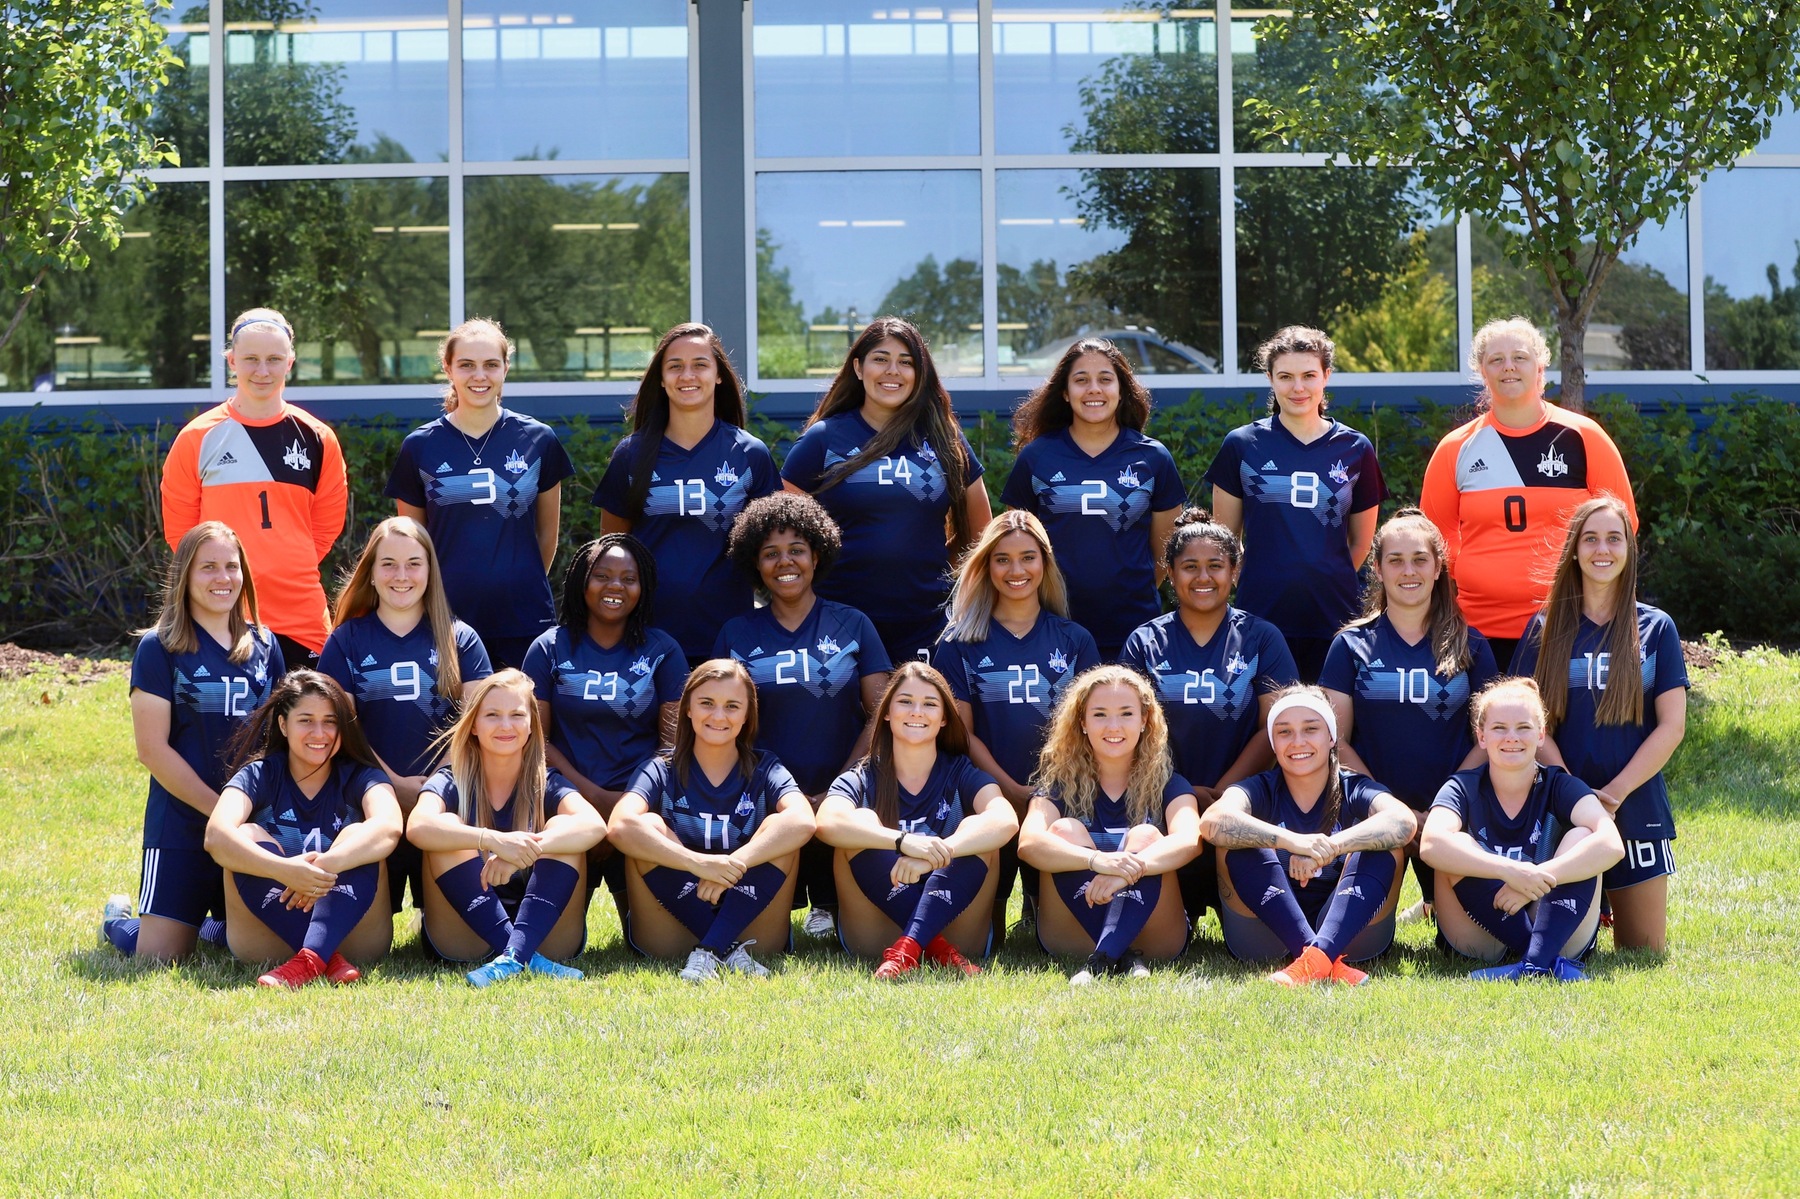 Tritons want to take next step on pitch